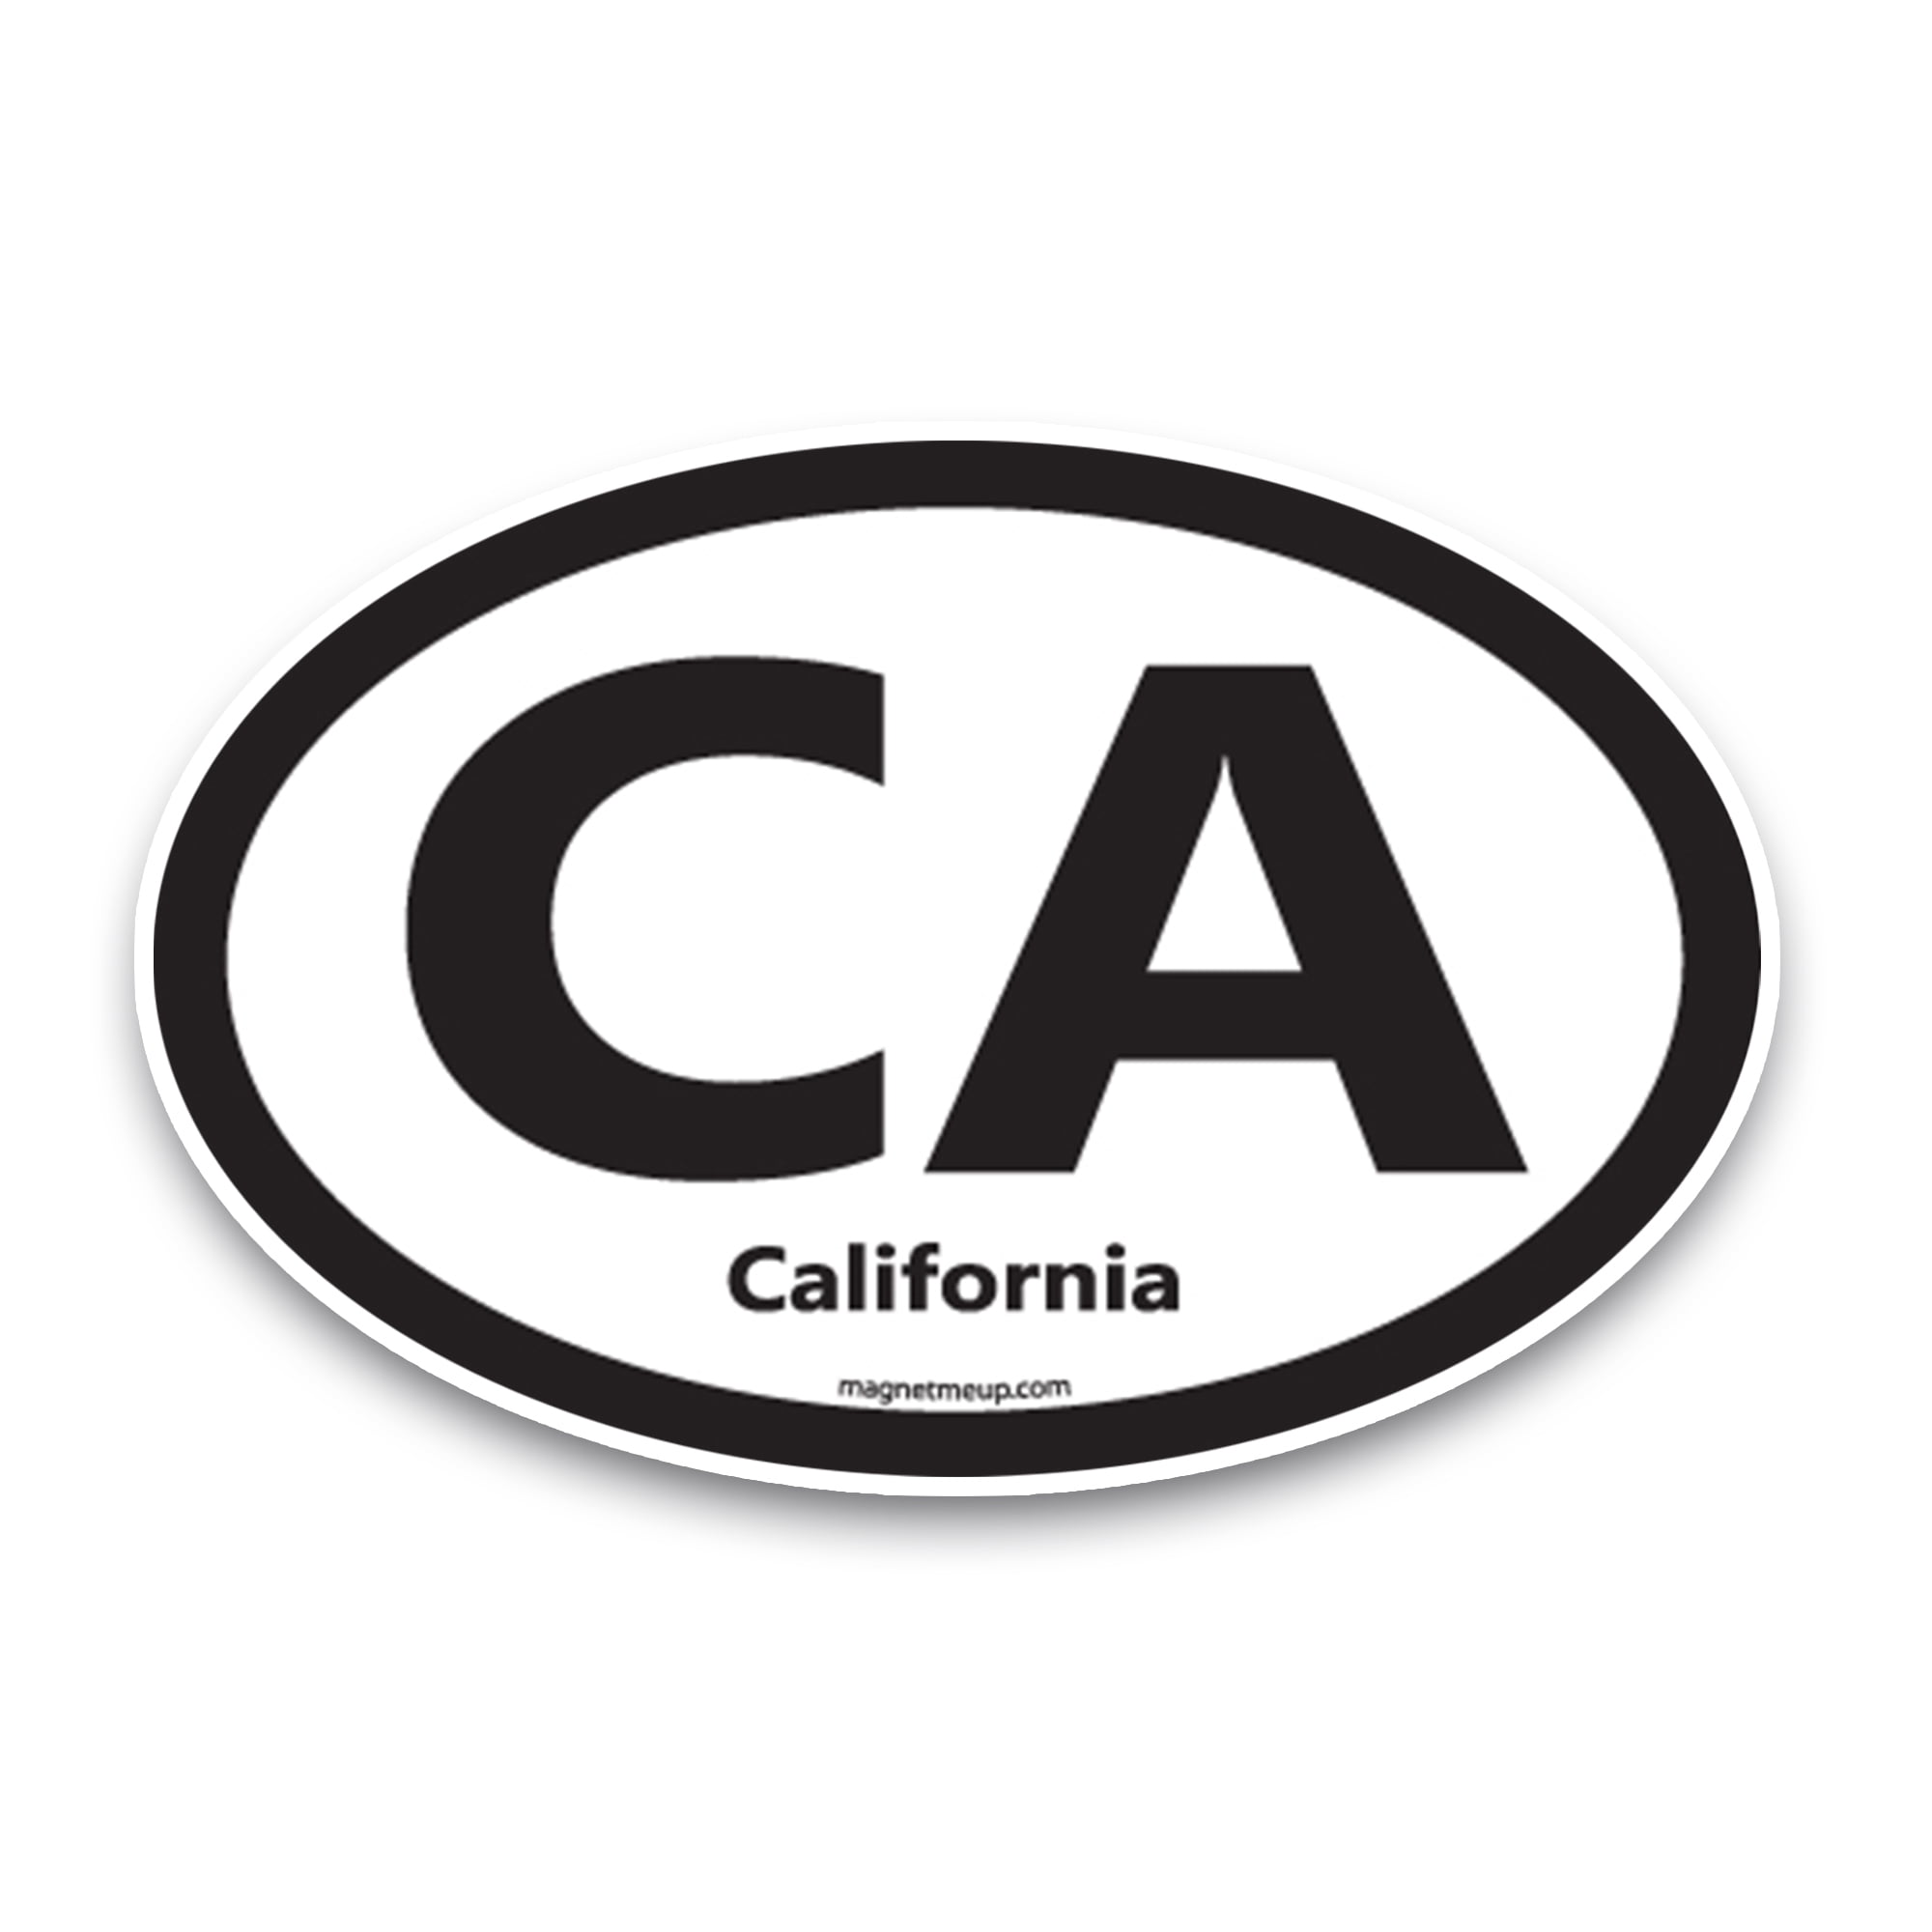 Magnet Me Up CA California US State Oval Magnet Decal, 4x6 In, Vinyl ...